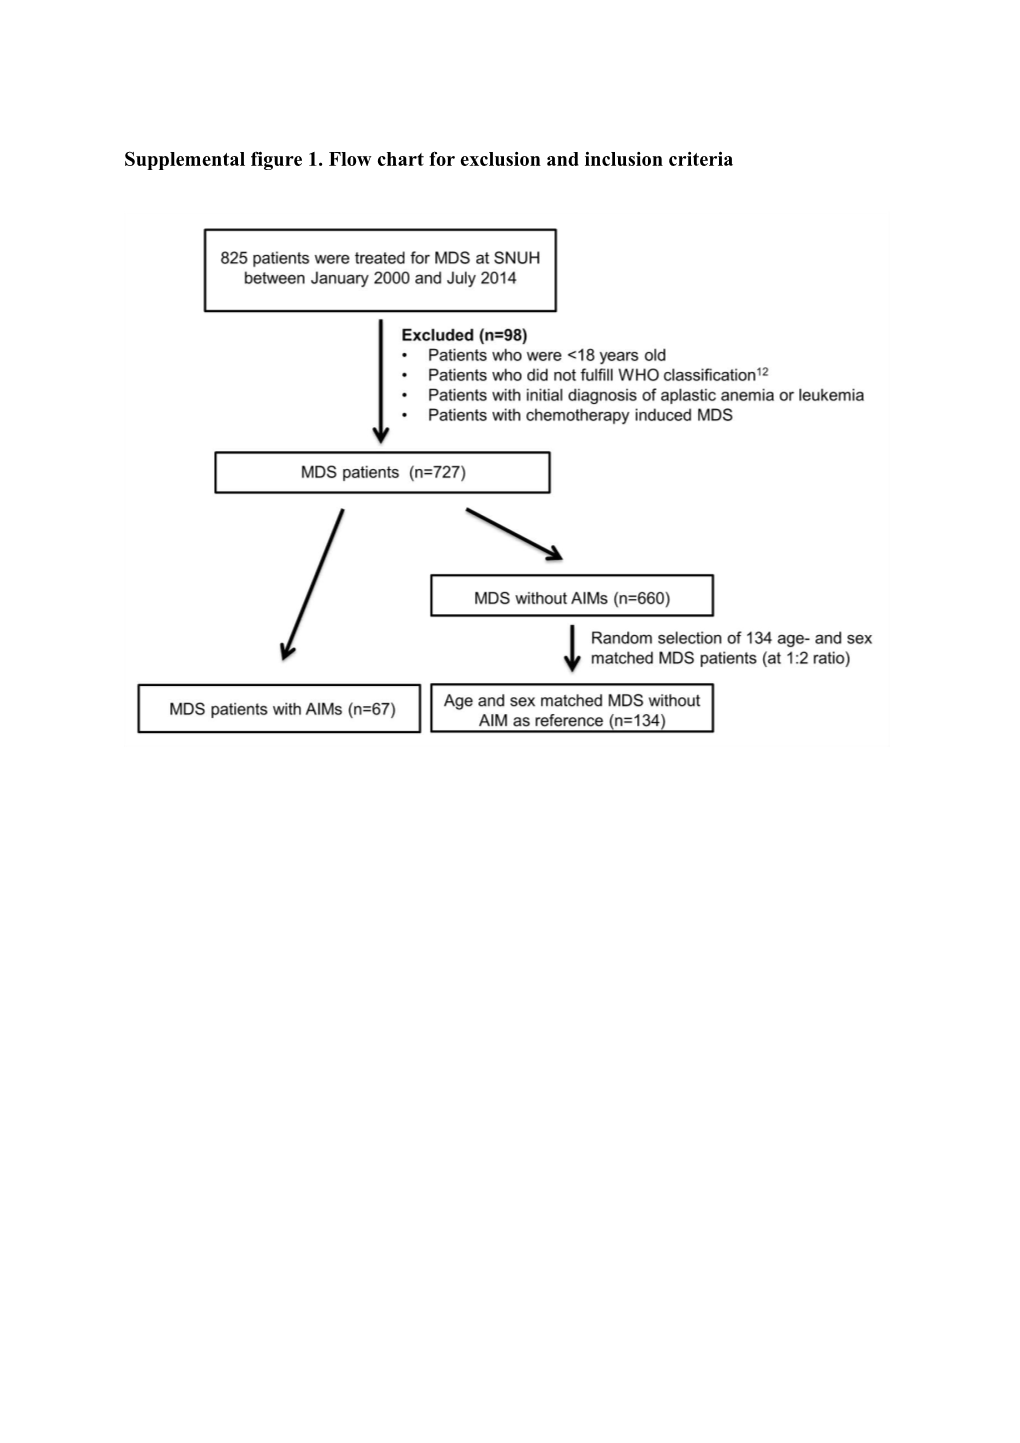 Supplemental Figure 1. Flow Chart for Exclusion and Inclusion Criteria